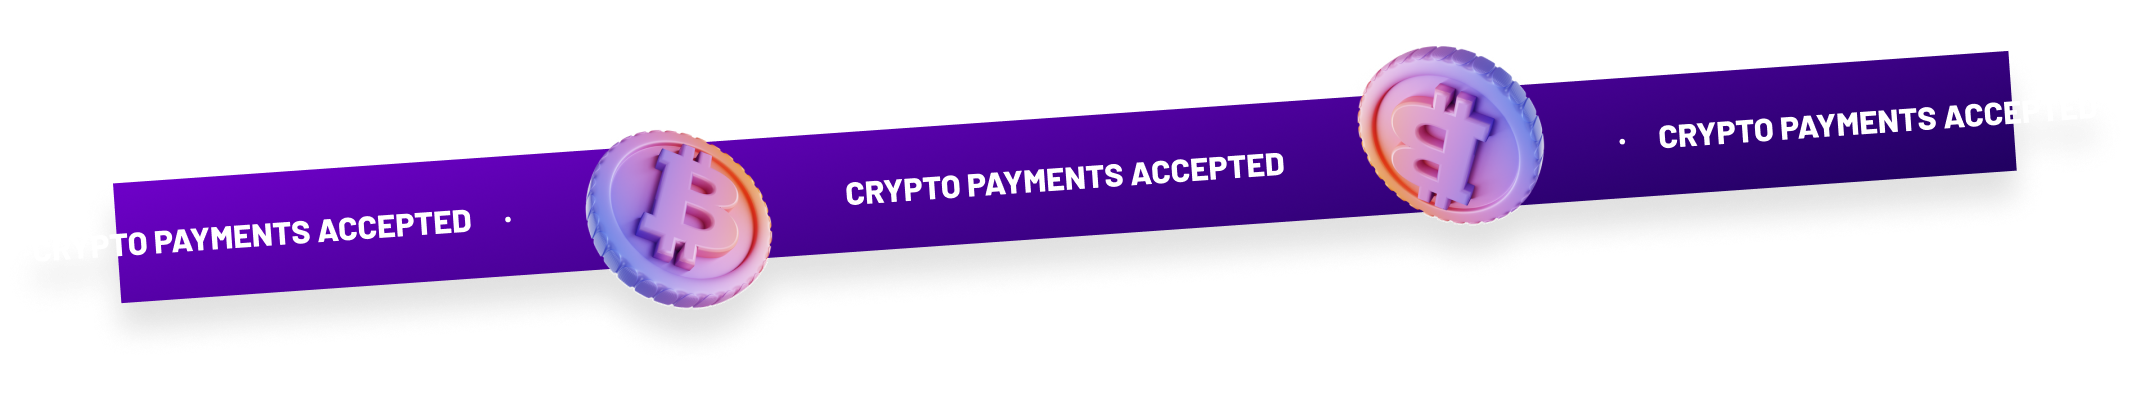 Crypto Payments Accepted Strip